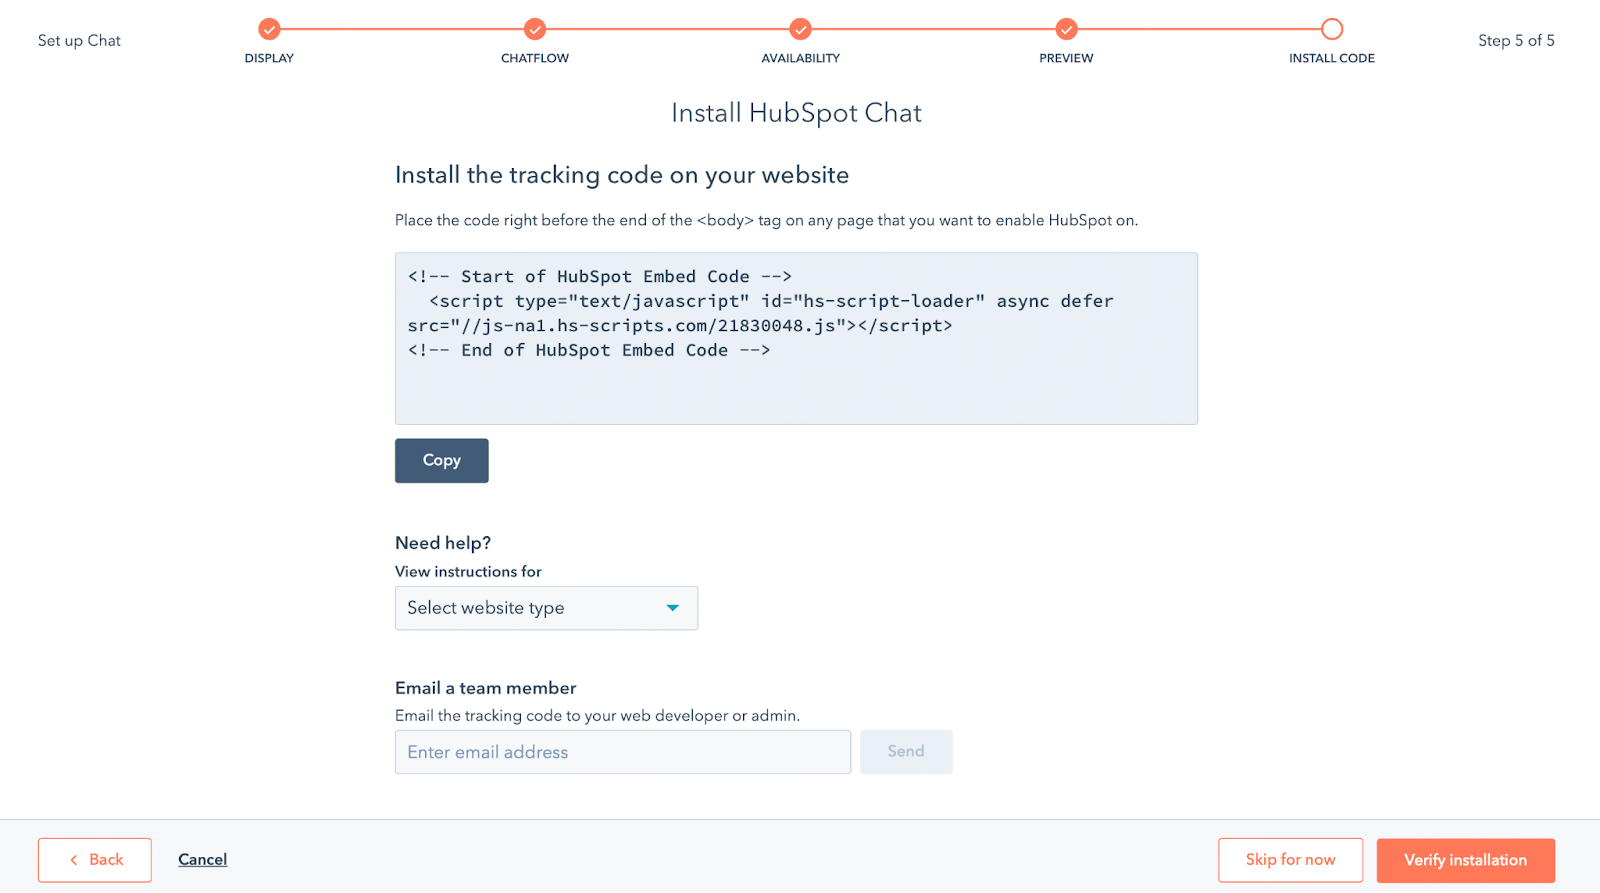 live chat for saas

